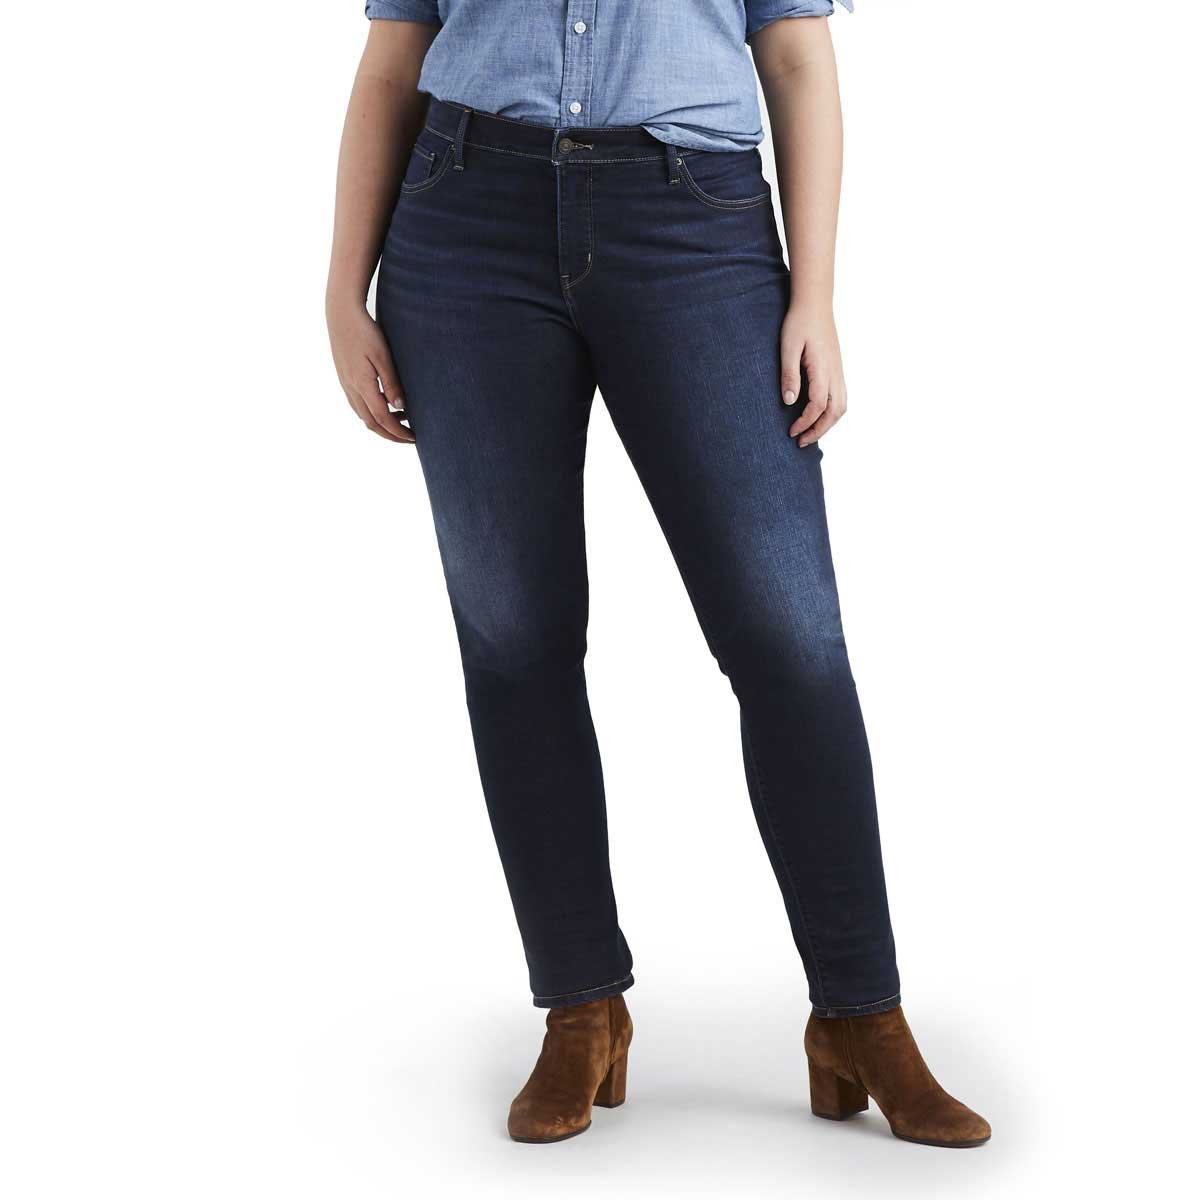 Jeans 311 Pl Shaping Skinny Plus Levis